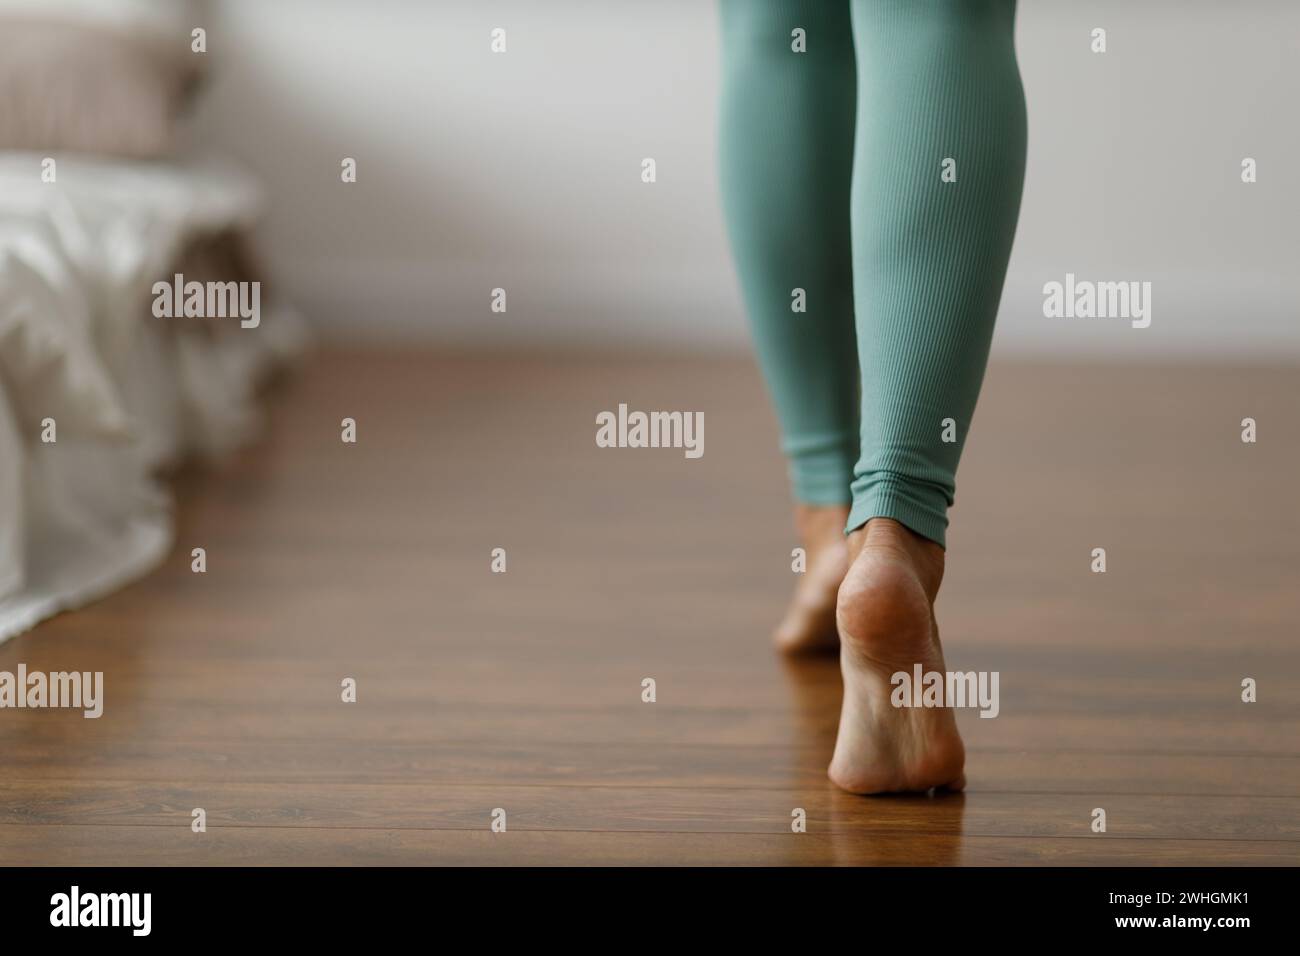 https://c8.alamy.com/comp/2WHGMK1/young-woman-in-sports-leggings-walks-barefoot-on-the-warm-floor-in-the-bedroom-close-up-of-cropped-image-of-barefoot-girl-underfloor-heating-system-2WHGMK1.jpg